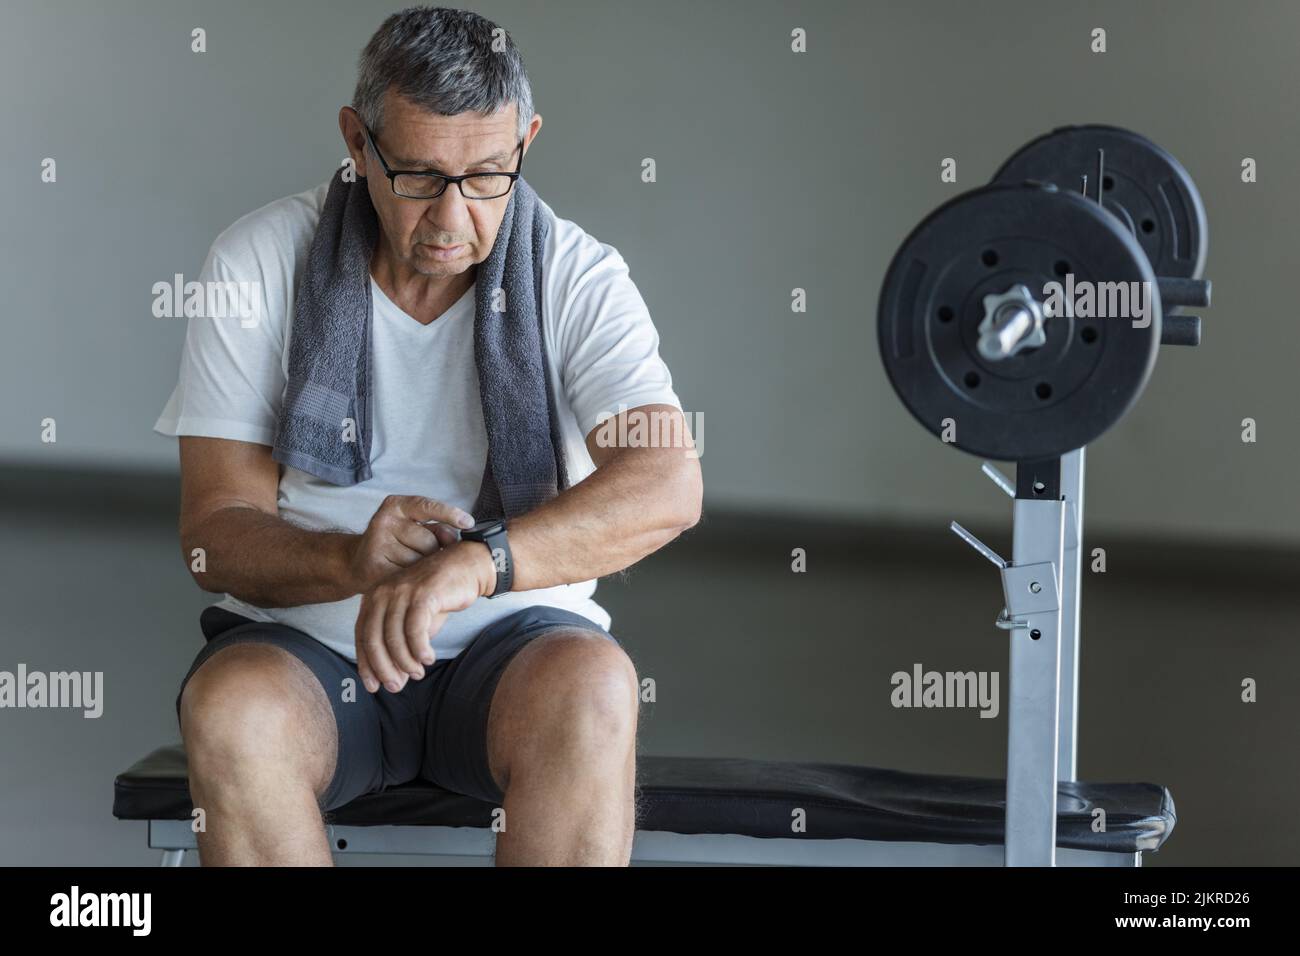 Active and healthy senior exercising in a gym Stock Photo